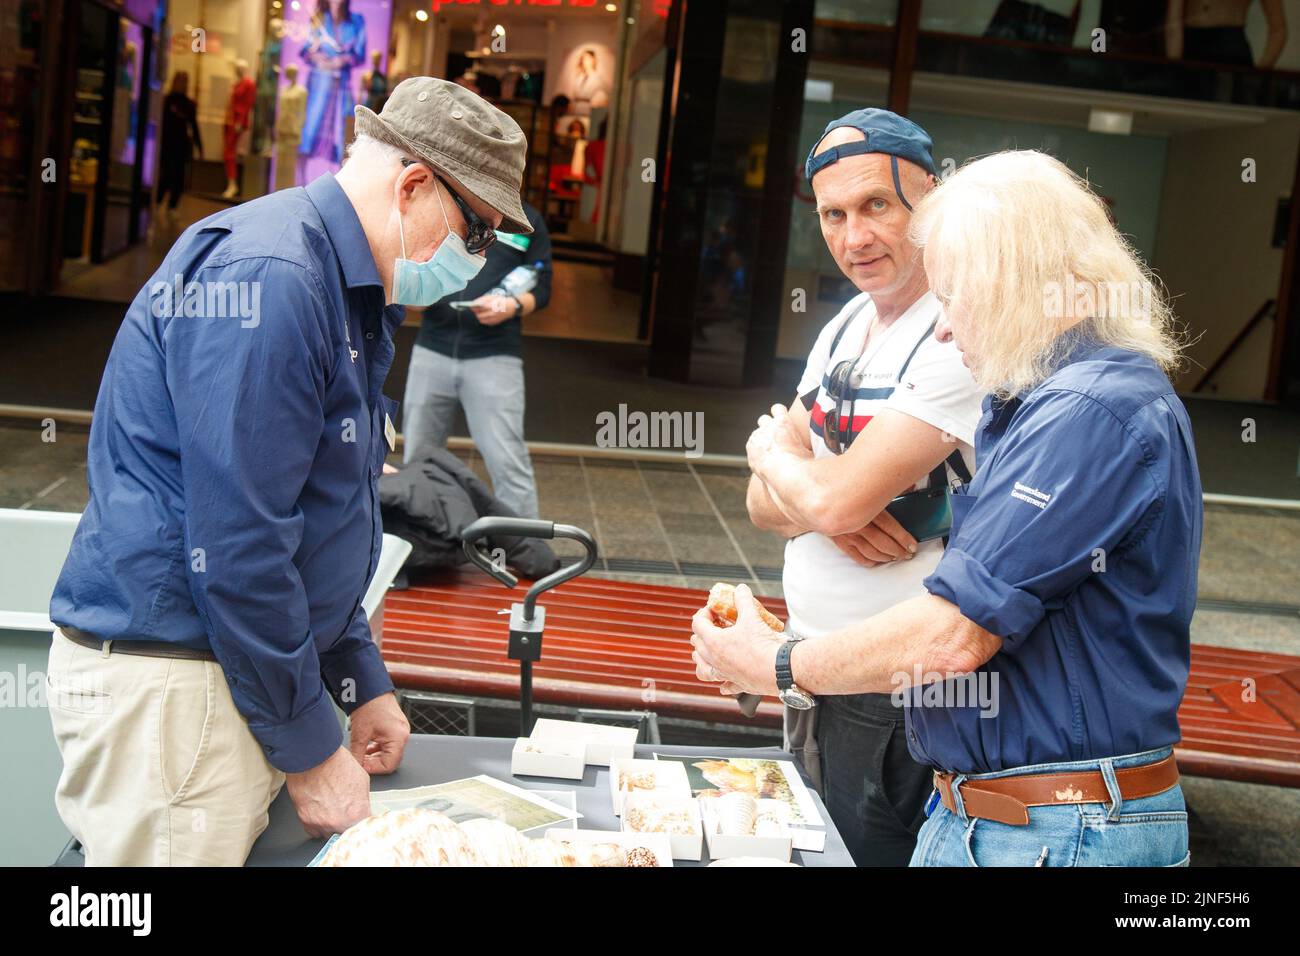 Brisbane, Australia. 11th Aug, 2022. Queensland Museum staff speak with members of the public about specimens during the launch of National Science Week in Brisbane' Queen Street Mall on 11 August 2022. Live experiments and museum specimen displays were performed in Brisbane's Queen Street Mall for the launch of National Science Week. National Science Week was established in 1997 to acknowledge the contributions of Australian scientists and technology. (Photo by Joshua Prieto/Sipa USA) Credit: Sipa USA/Alamy Live News Stock Photo